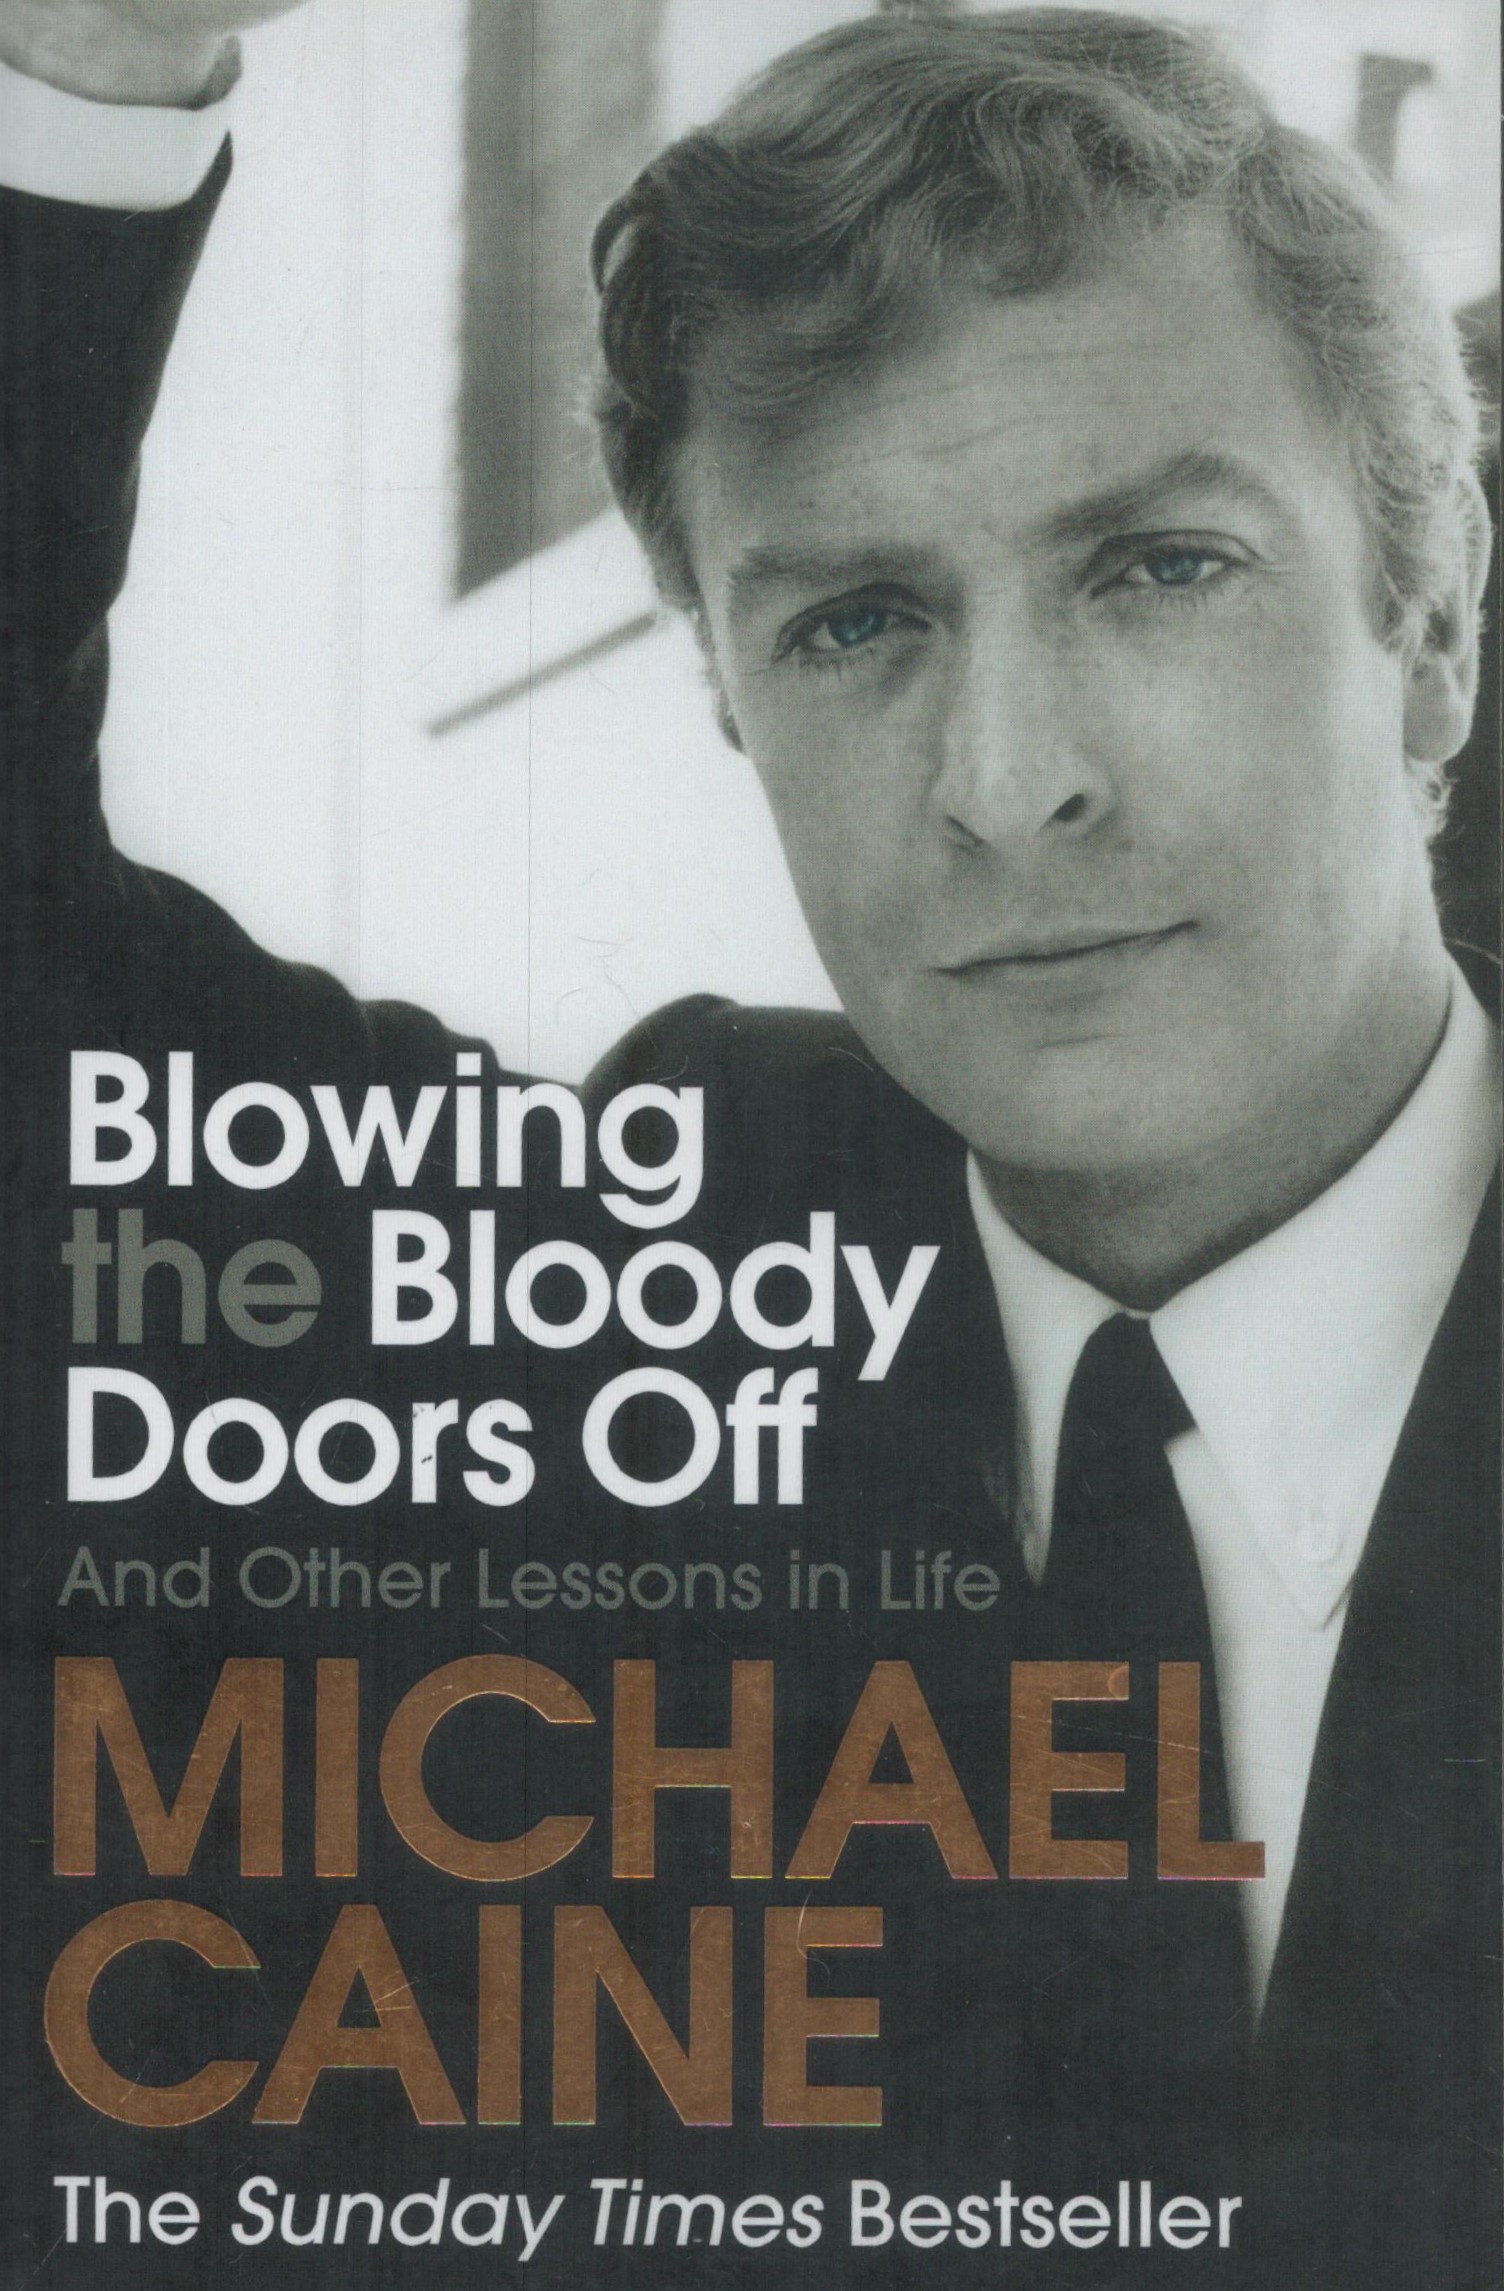 Michael Caine signed Blowing The Bloody Doors Off And Other Lessons In Life hardback book. Good